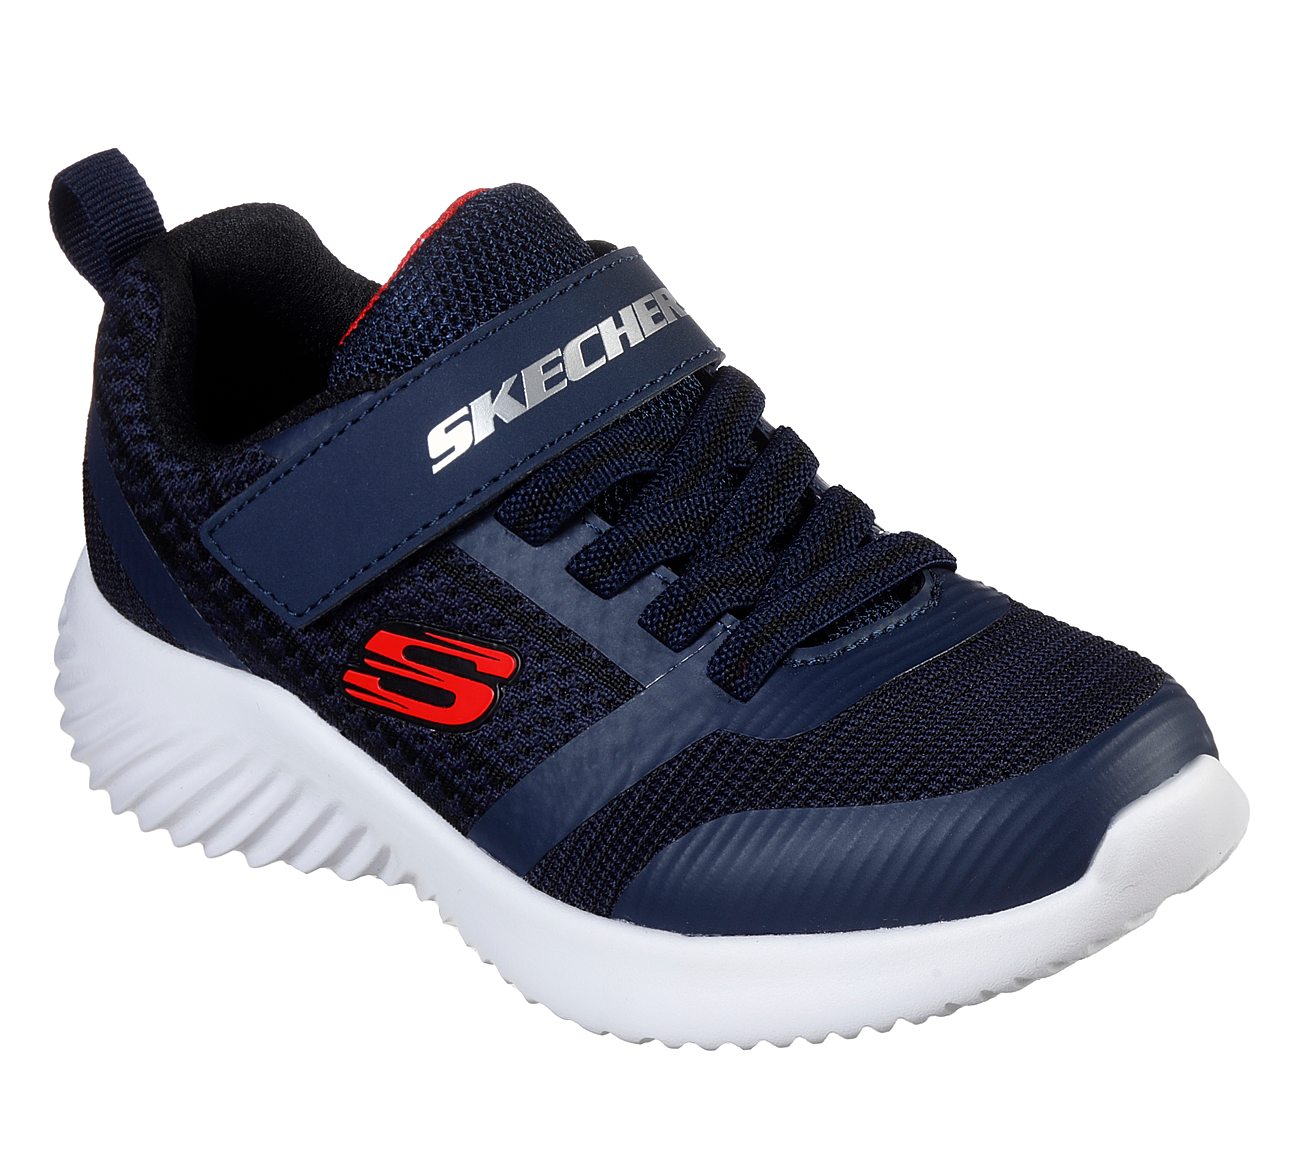 skechers non marking shoes Sale,up to 